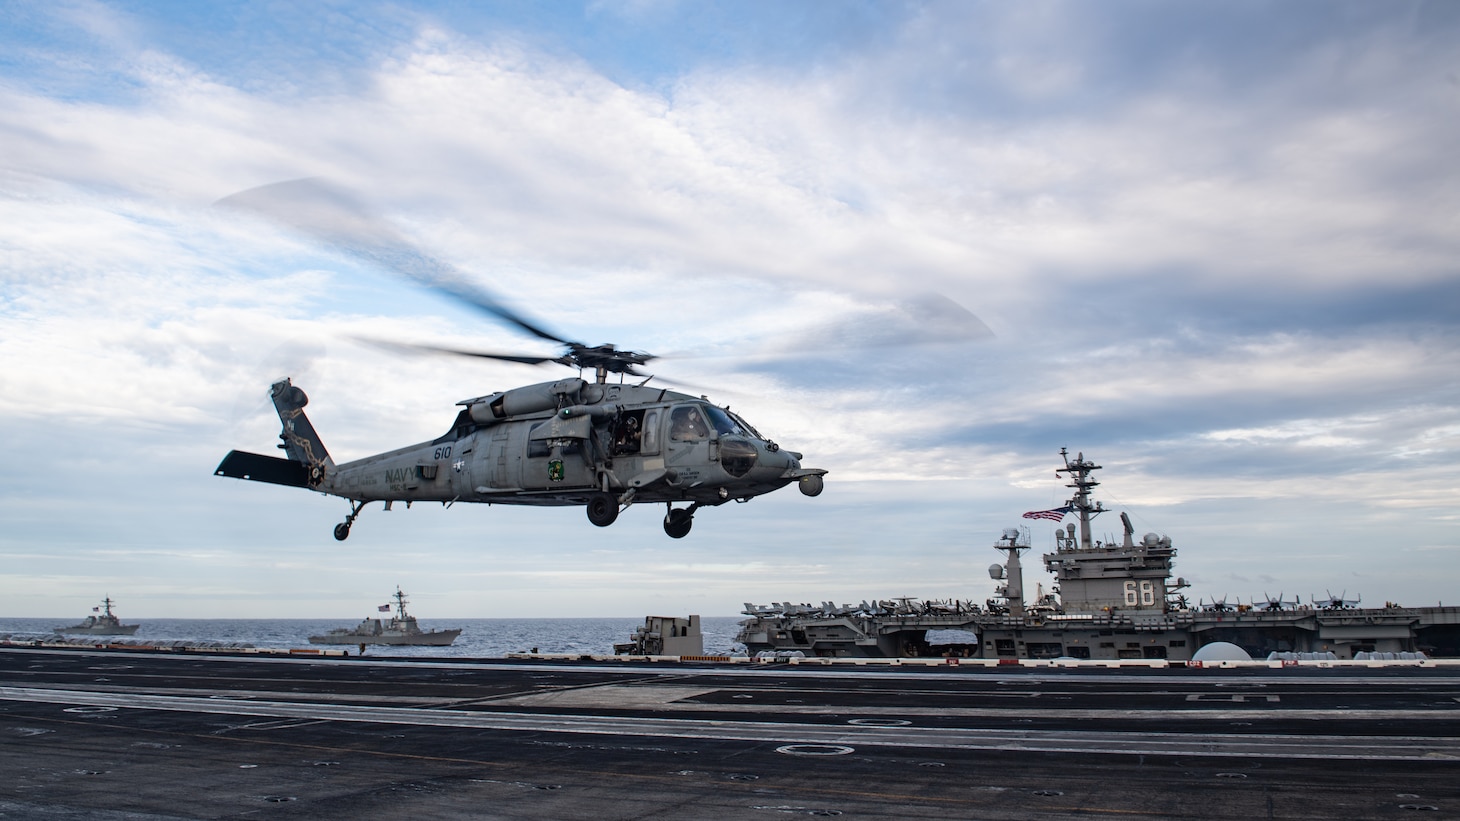 SOUTH CHINA SEA (Feb. 9, 2021) An MH-60S Sea Hawk, assigned to the “Eightballers” of Helicopter Sea Combat Squadron (HSC) 8, lands on the flight deck of the aircraft carrier USS Theodore Roosevelt (CVN 71) while the ship transits in formation with the Nimitz Carrier Strike Group in the South China Sea Feb. 9, 2021. The Theodore Roosevelt and Nimitz Carrier Strike Groups are conducting dual-carrier operations during their deployments to the 7th Fleet area of operations. As the U.S. Navy’s largest forward-deployed fleet, 7th Fleet routinely operates and interacts with 35 maritime nations while conducting missions to preserve and protect a free and open Indo-Pacific region. (U.S. Navy photo by Mass Communication Specialist 2nd Class Zachary Wheeler)